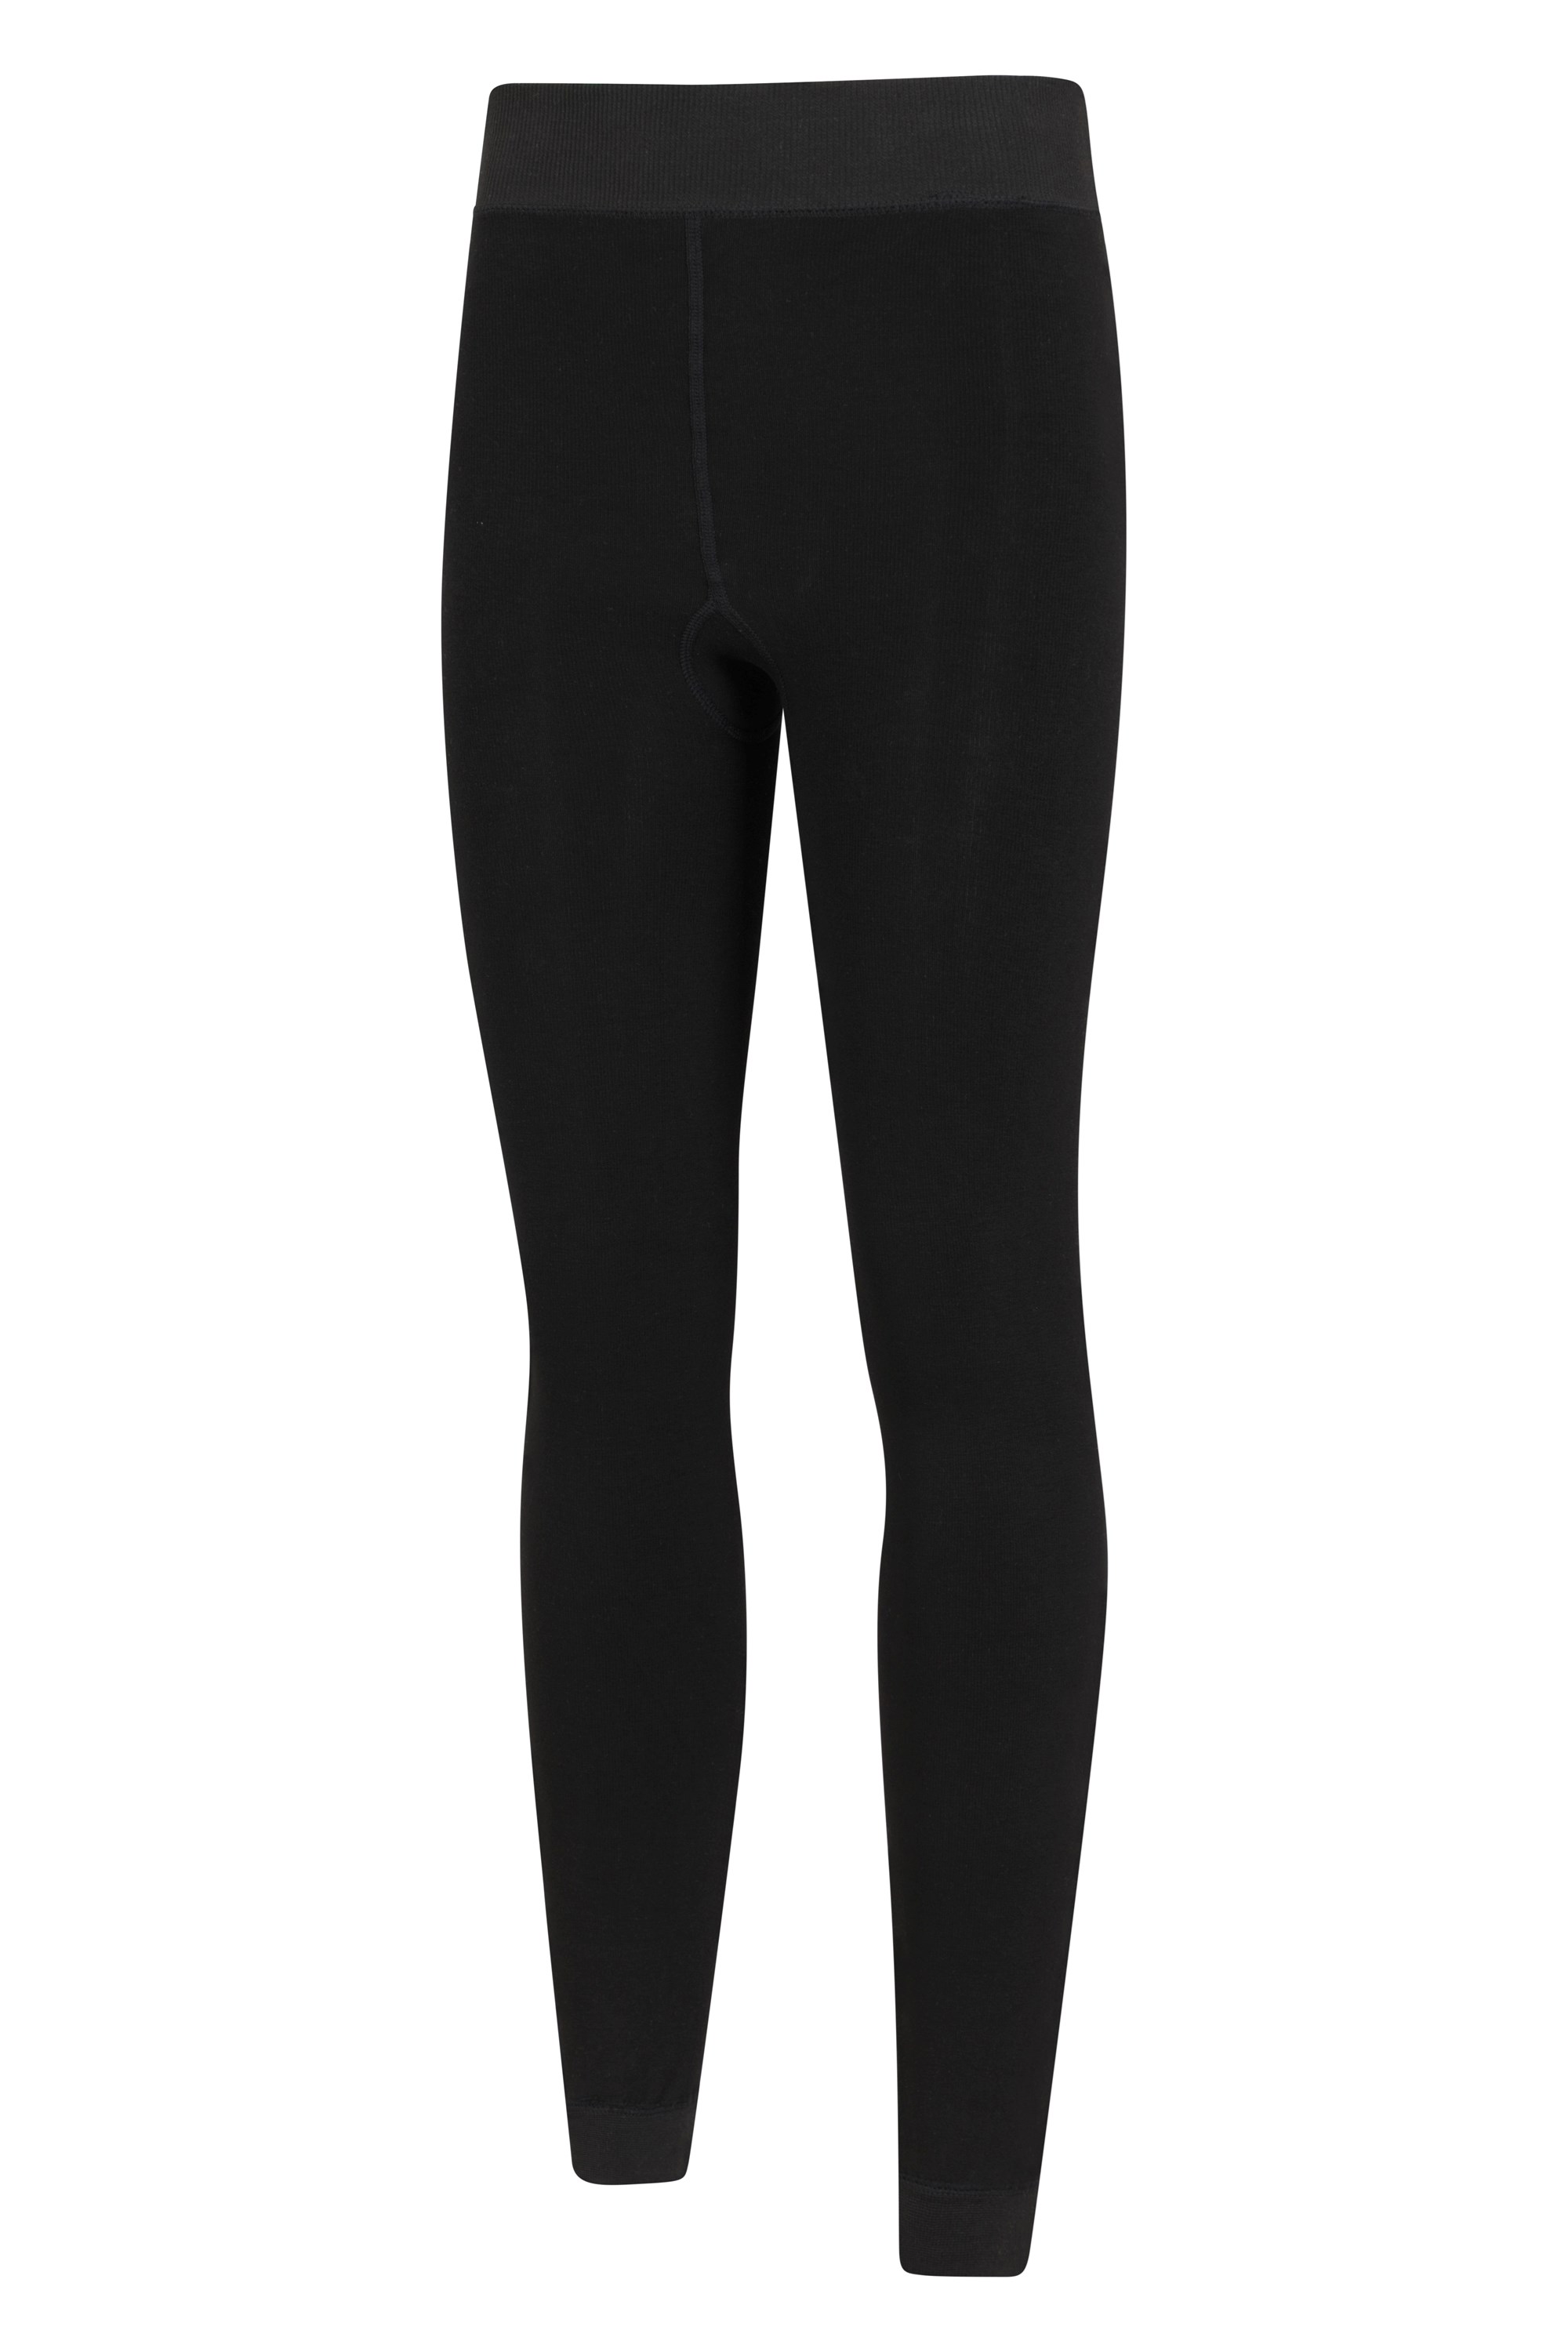 Buy Thermajane Long Johns for Women - Thermal Leggings for Women, Fleece  Lined Thermal Underwear Bottoms, Black, X-Small at Amazon.in